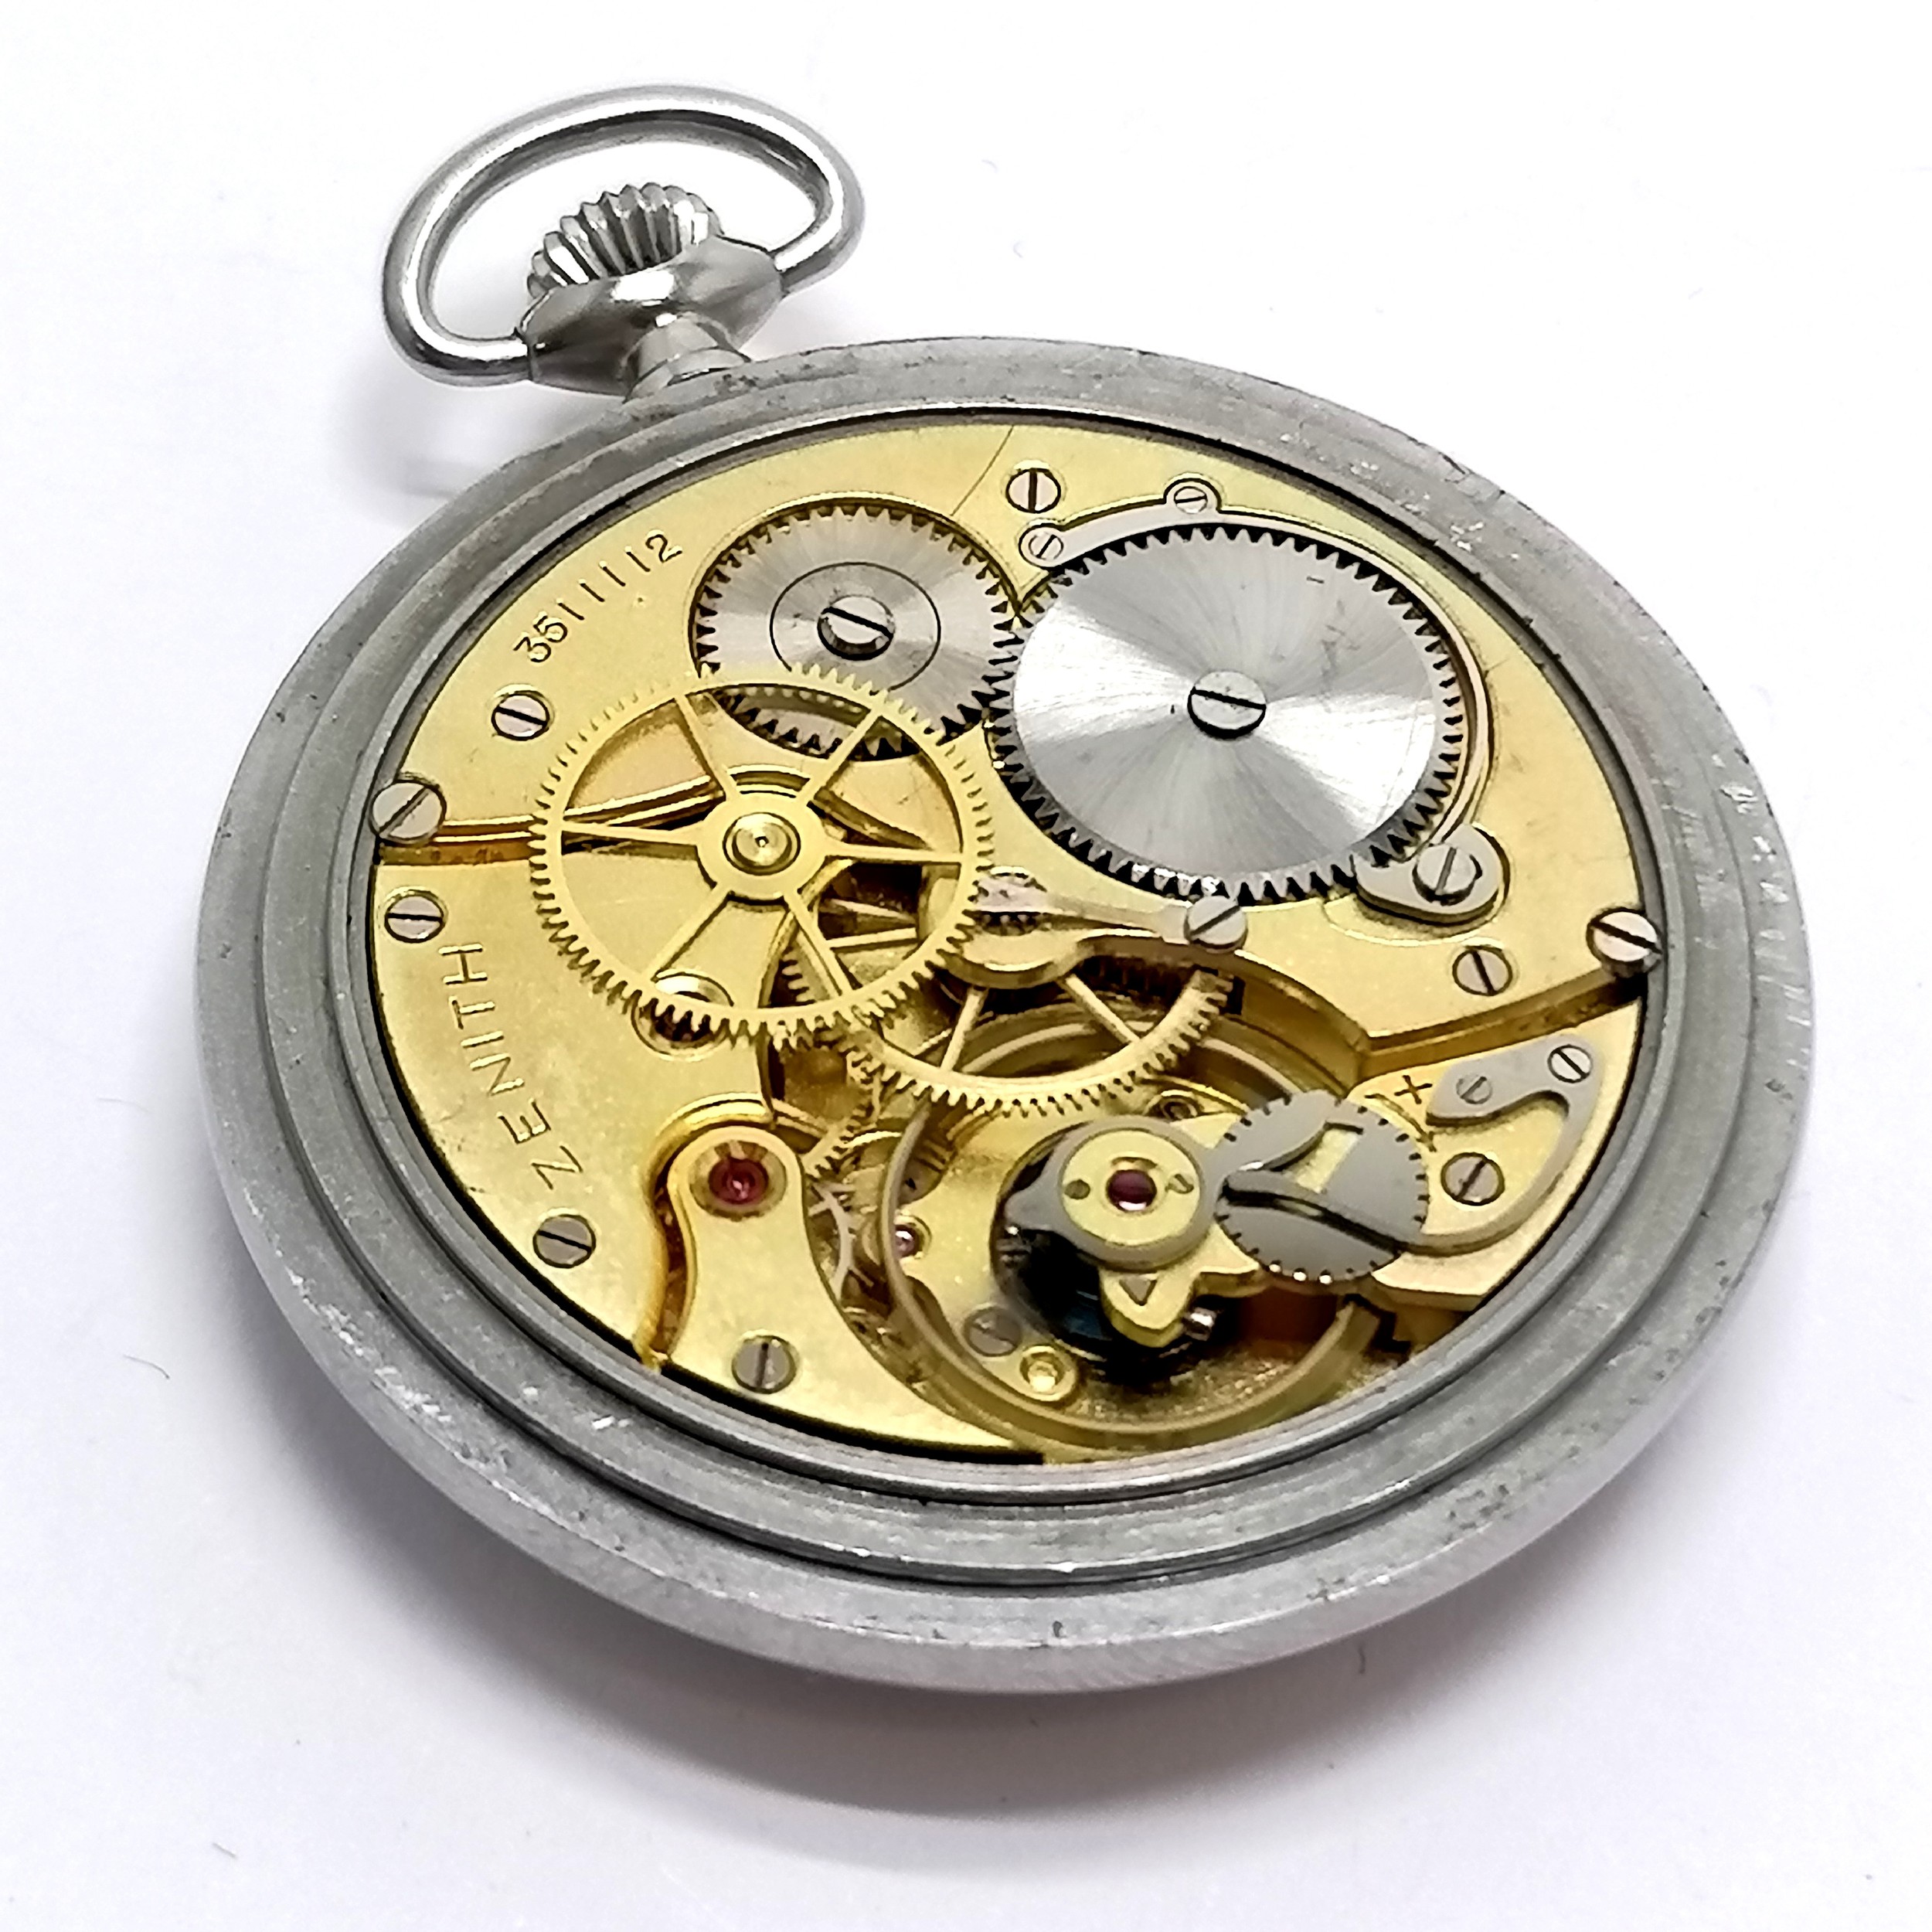 Zenith pocket watch in steel 48mm case with centre sweep second hand #18-28-2-T - Zenith marked case - Image 4 of 4